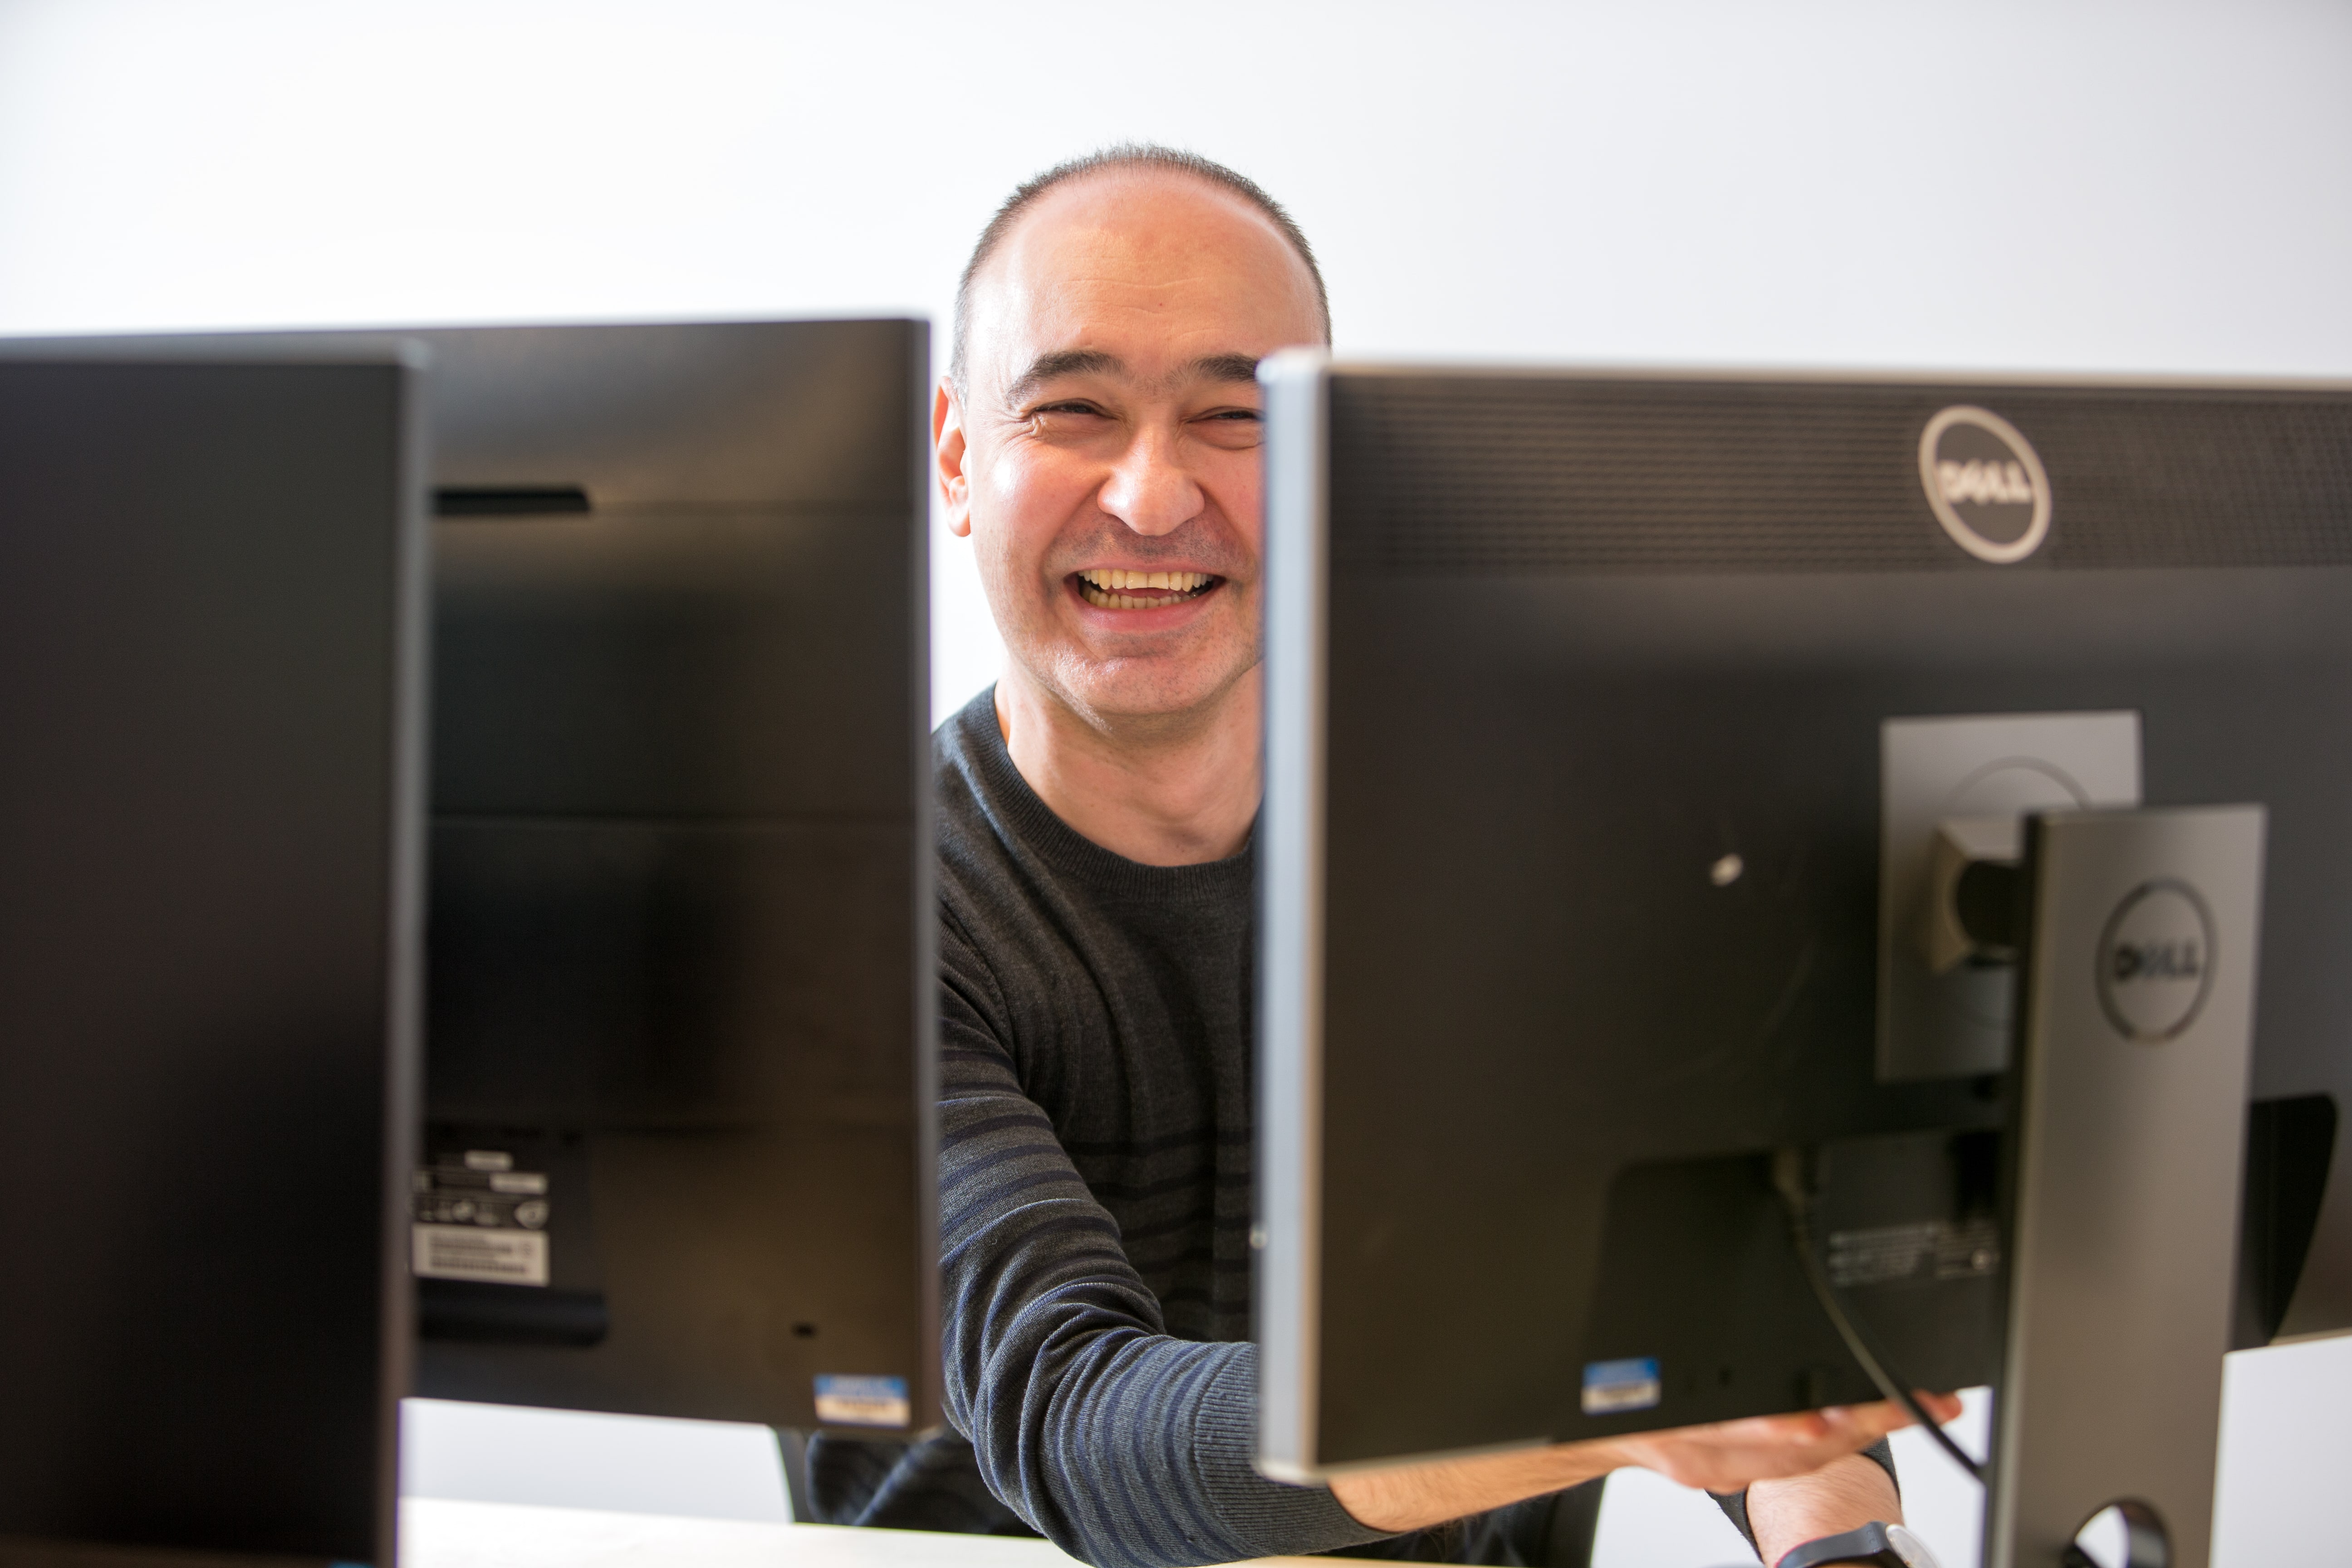 Thought machine employee smiling behind computer screens